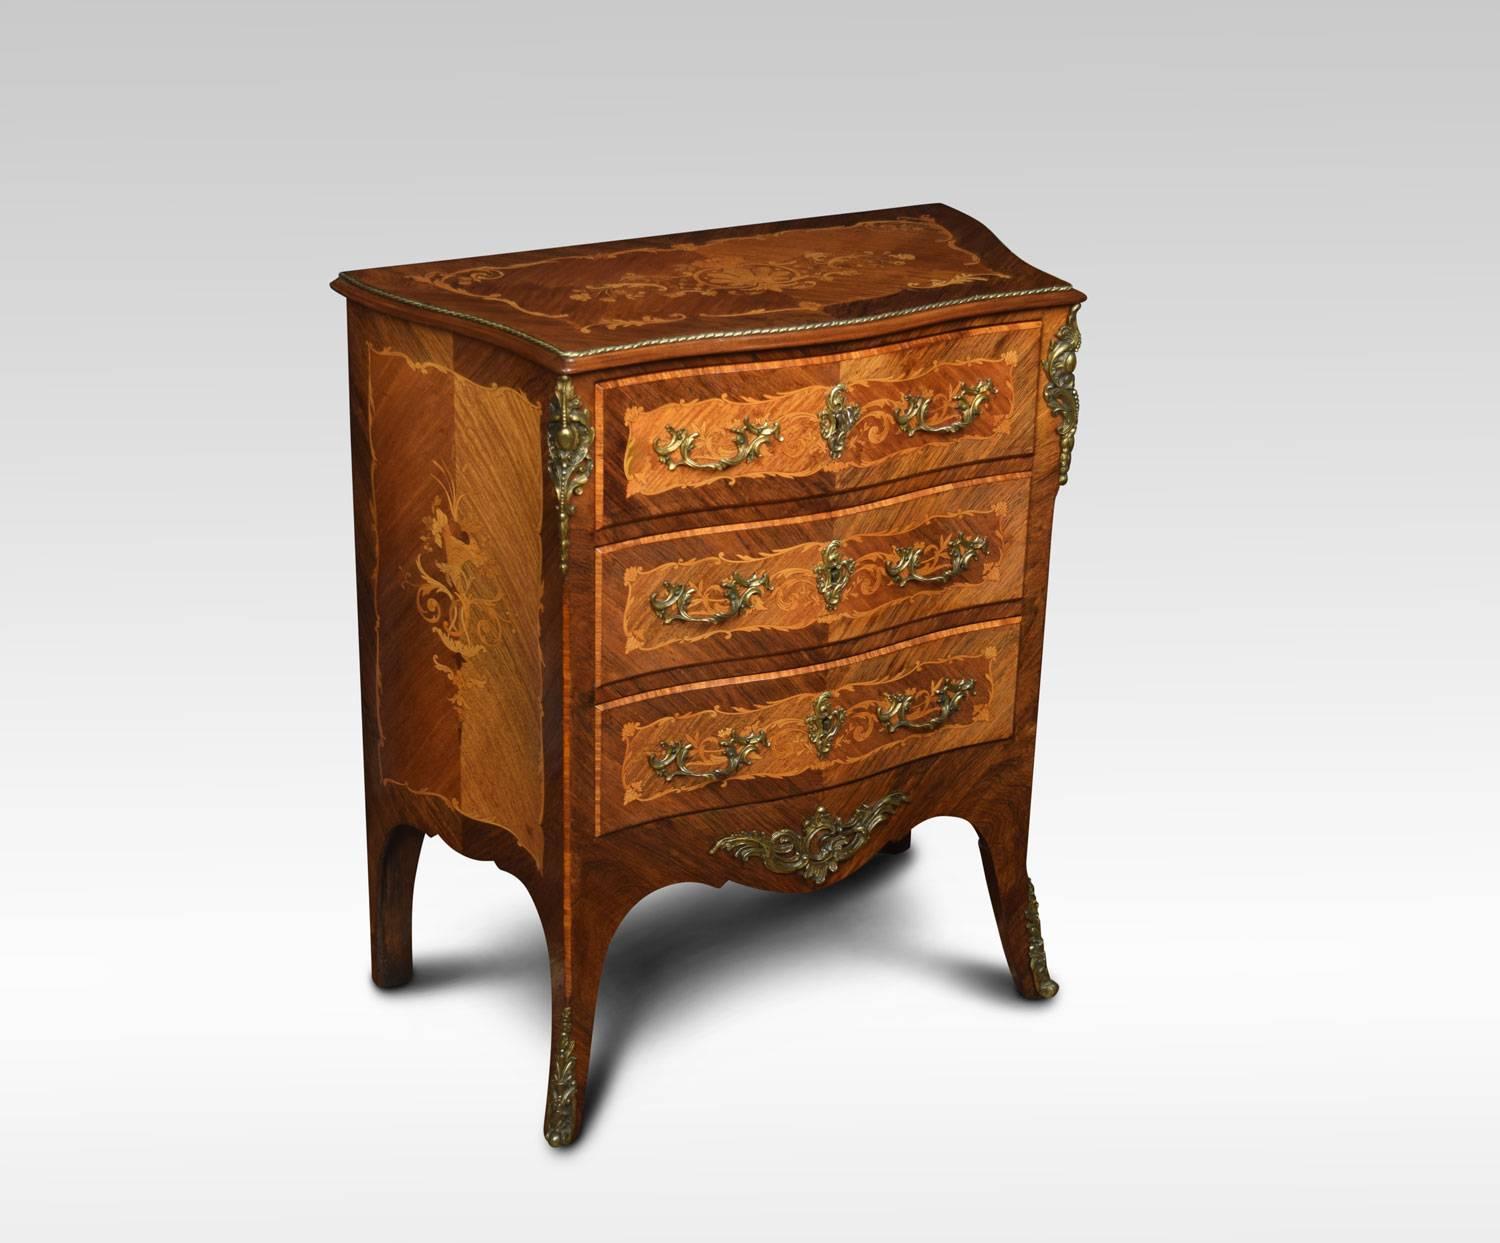 Kingwood and rosewood marquetry commode of Louis XV style, late 19th century, the floral marquetry inlaid top and conforming side panels with gilt metal mounts. Above unusual secretaire draw with inset burgundy tooled leather writing surface, having